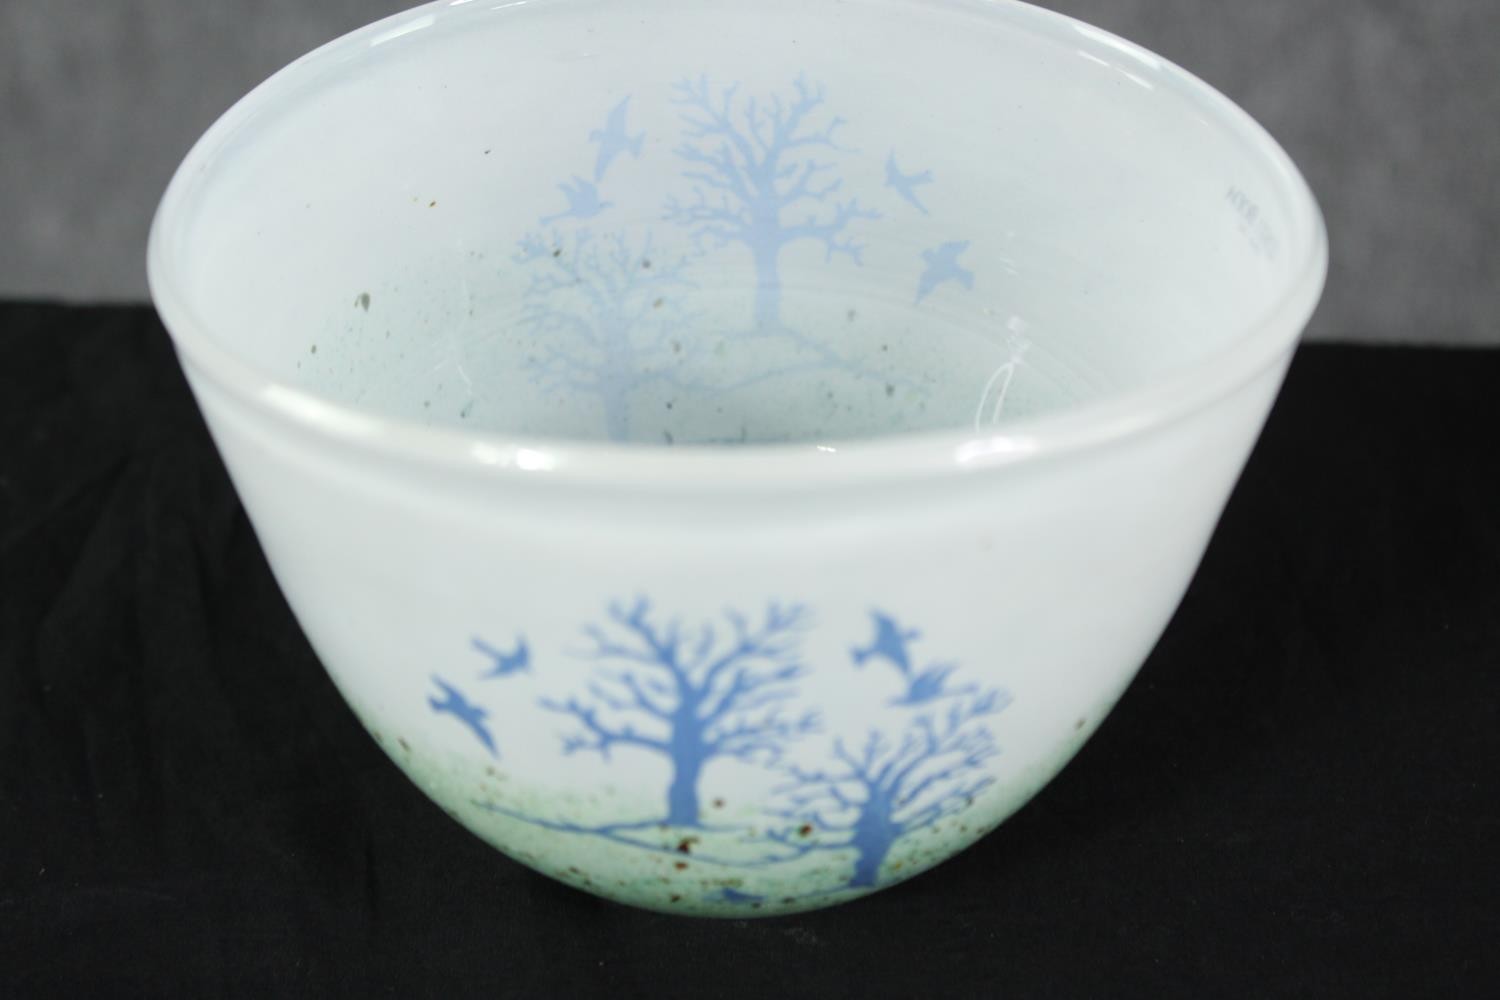 A collection of glass and ceramics, including a Kosta Boda art glass bowl with tree and bird design, - Image 2 of 8